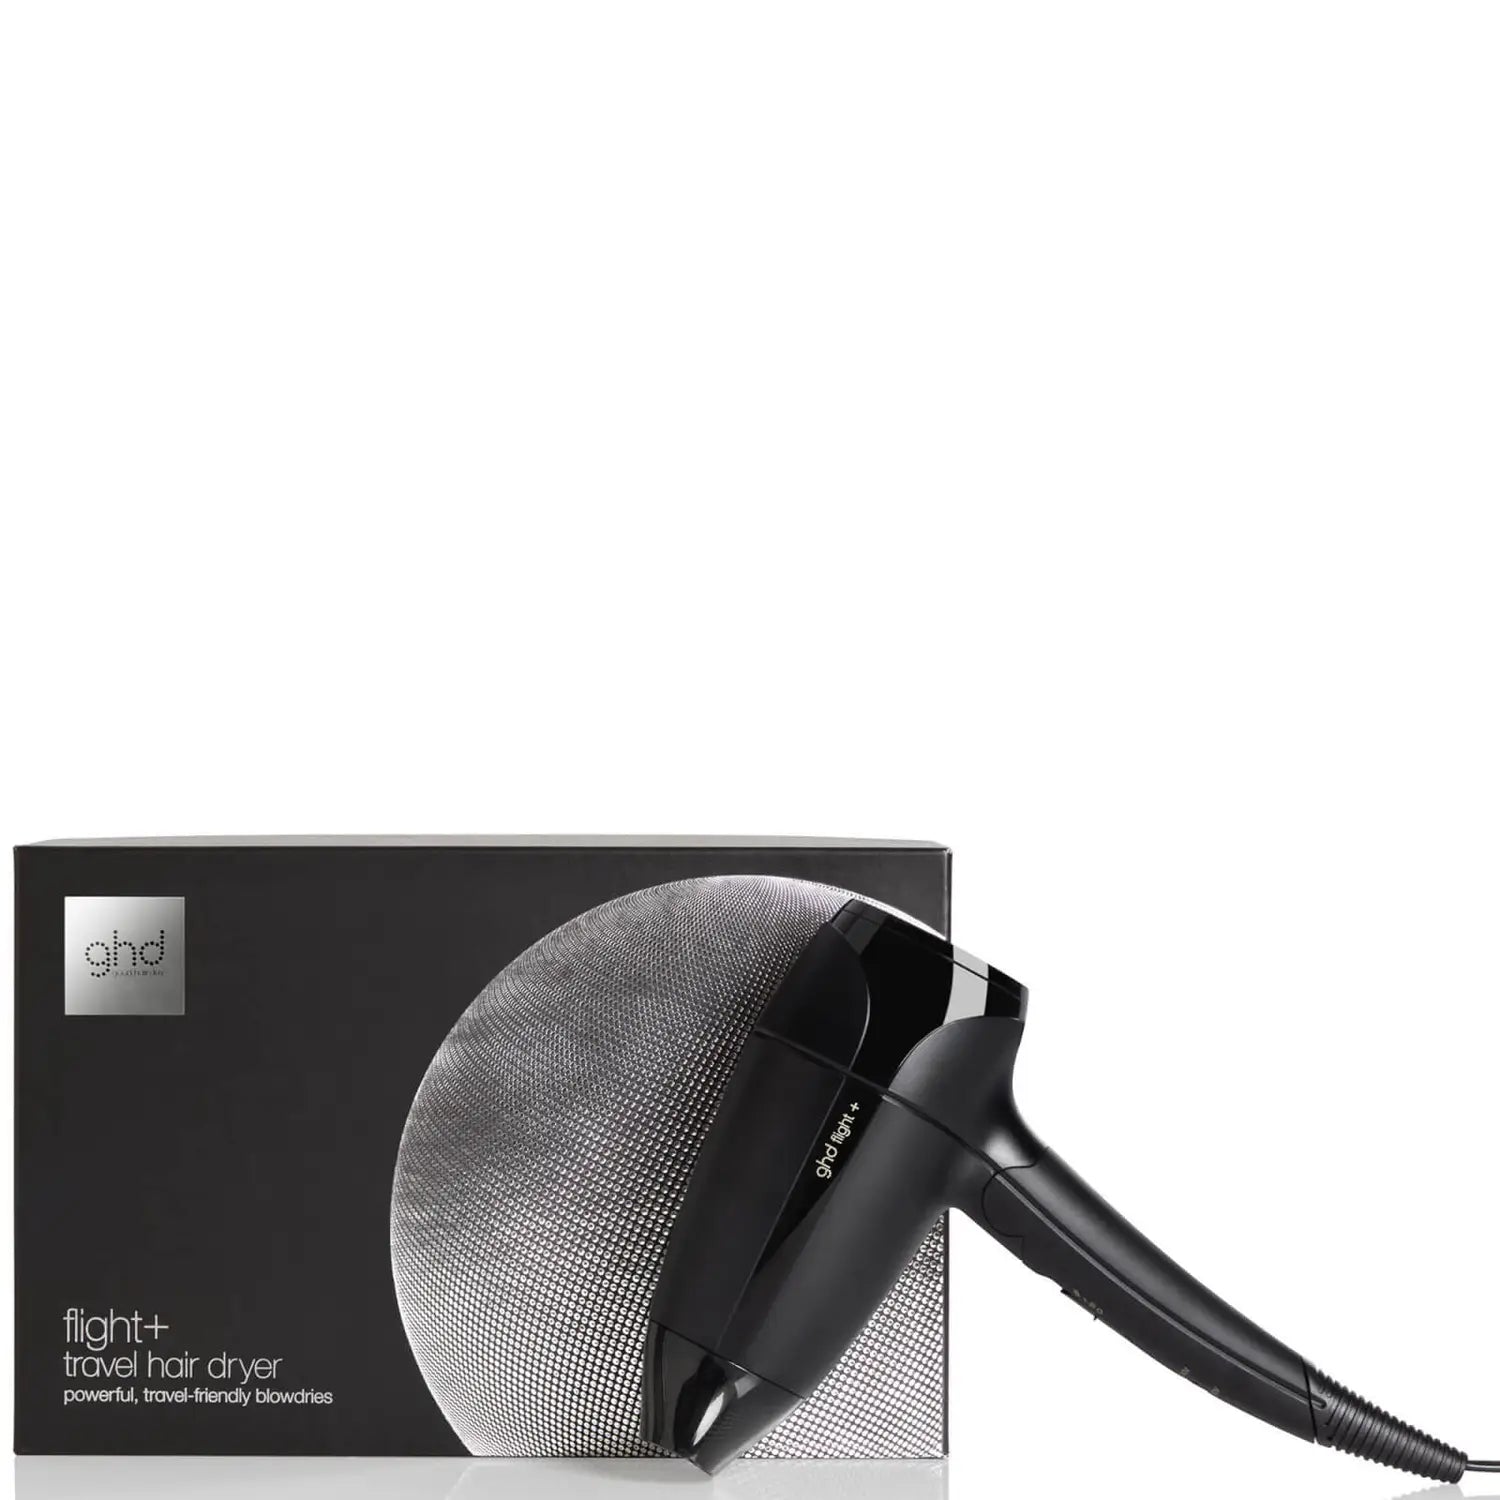 ghd Flight+ Travel Hair Dryer, with packaging